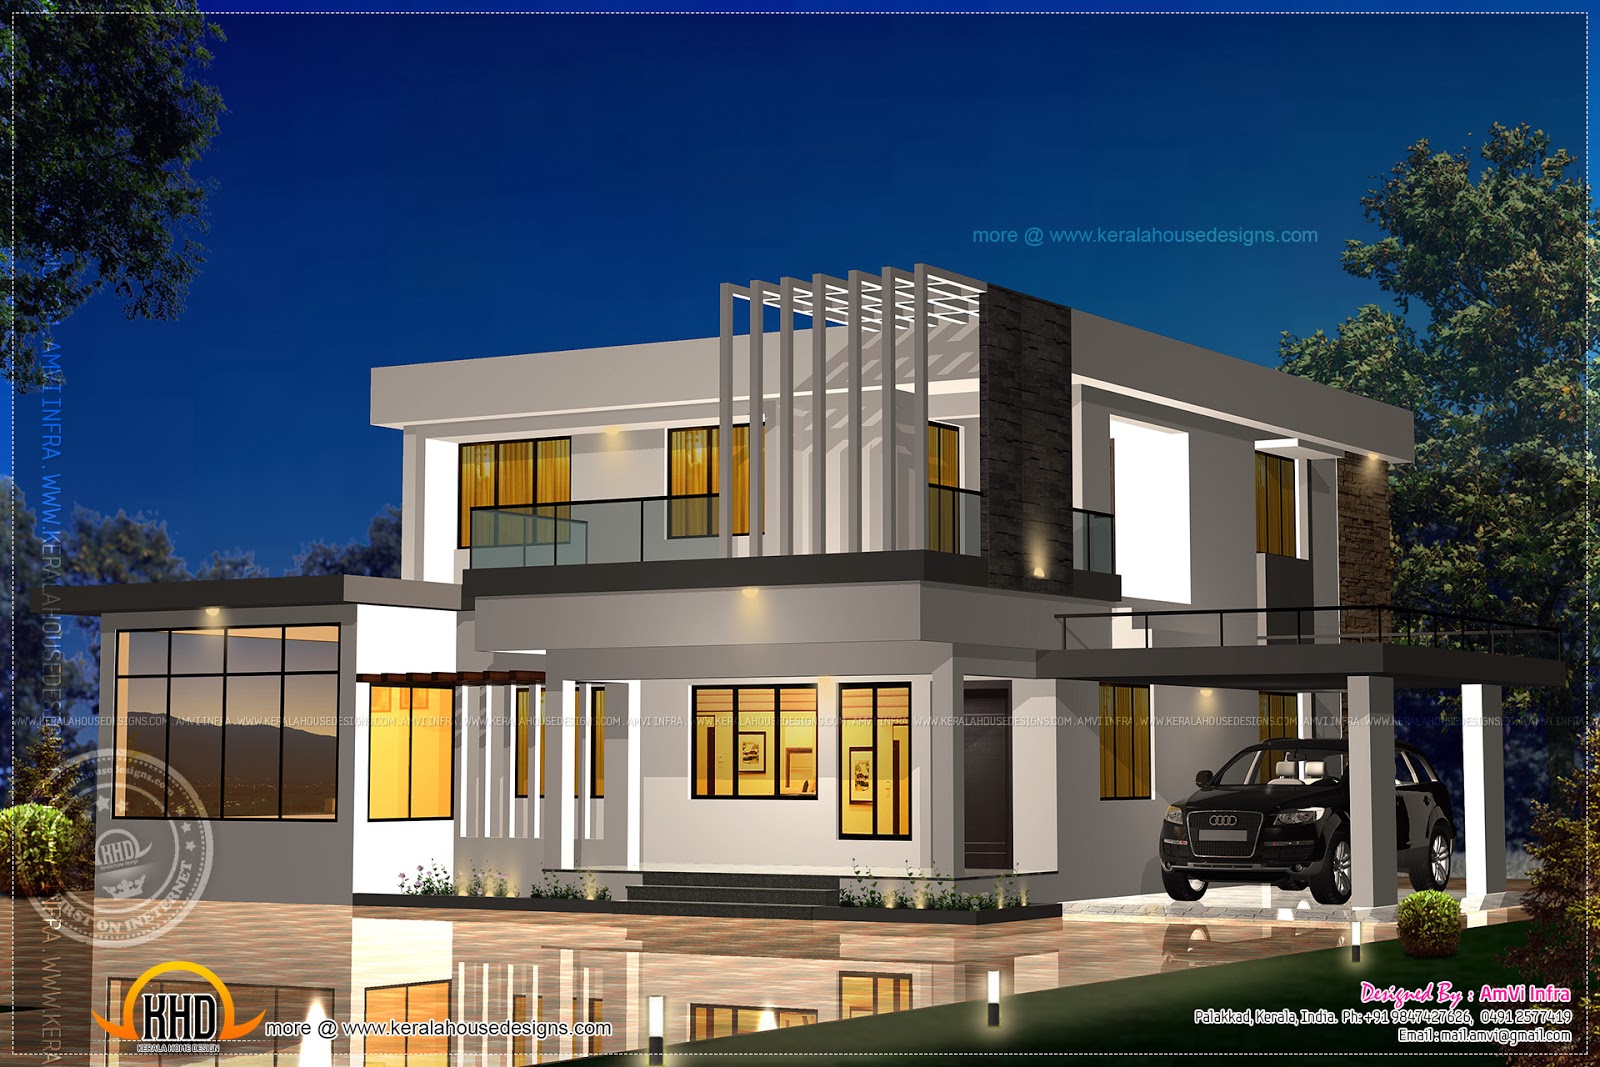  Elevation  and floor plan  of contemporary  home  Indian 